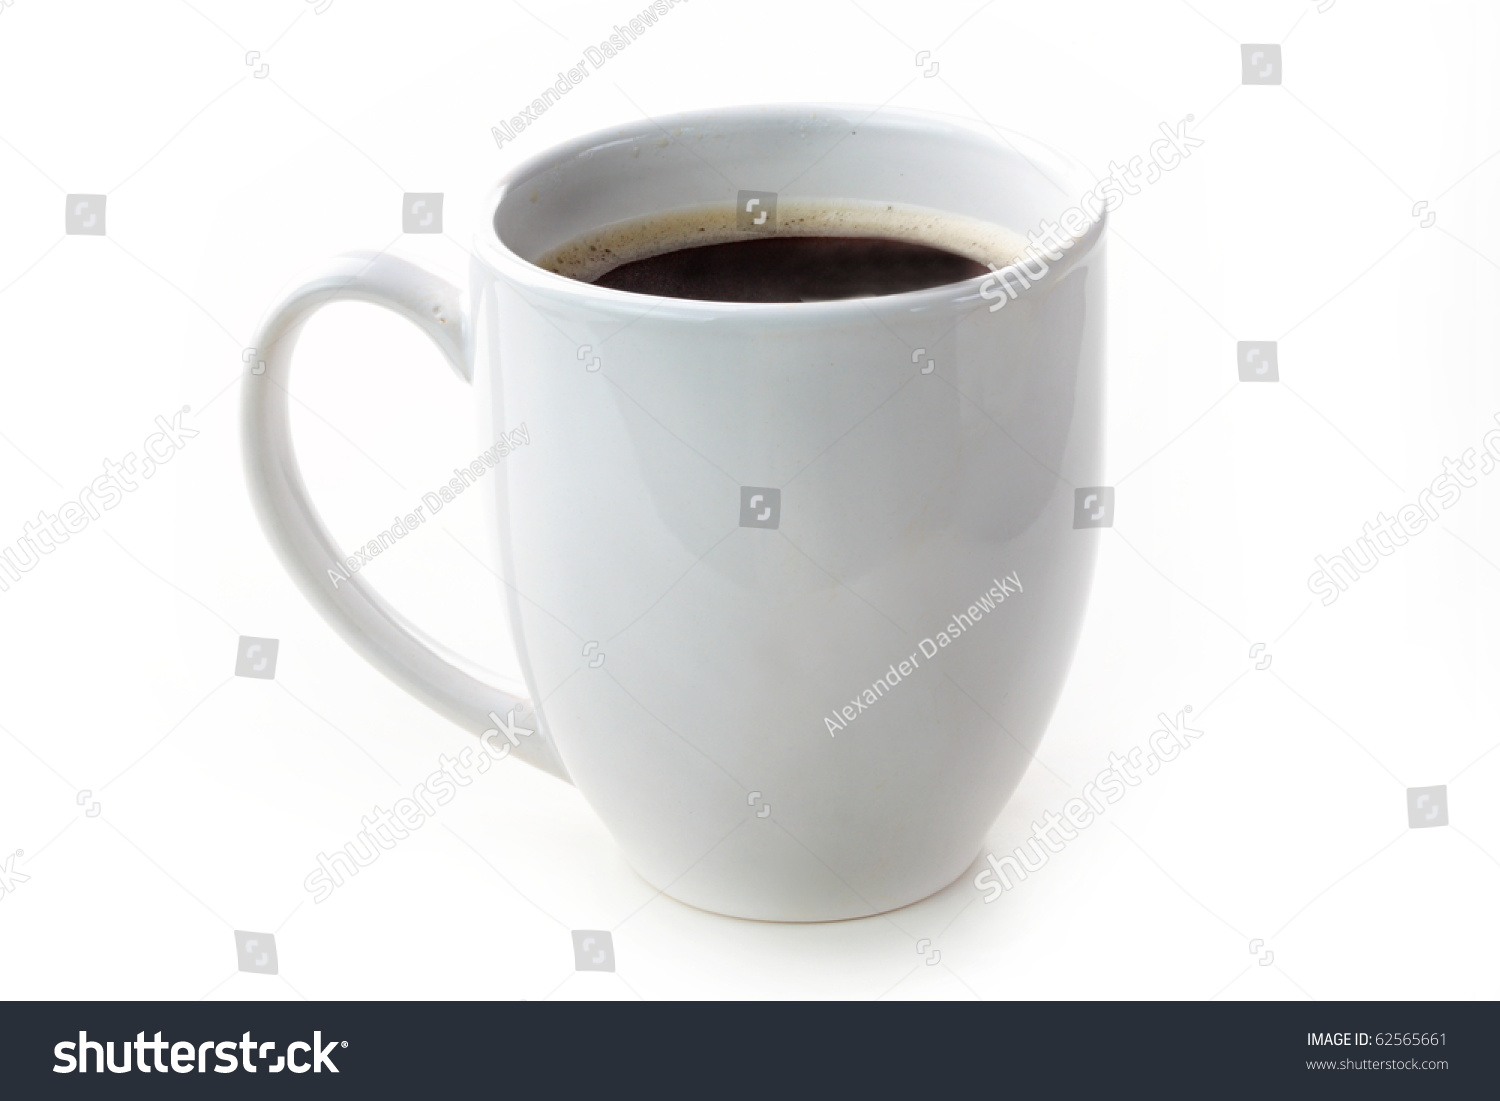 Cup of coffee isolated on white background #62565661